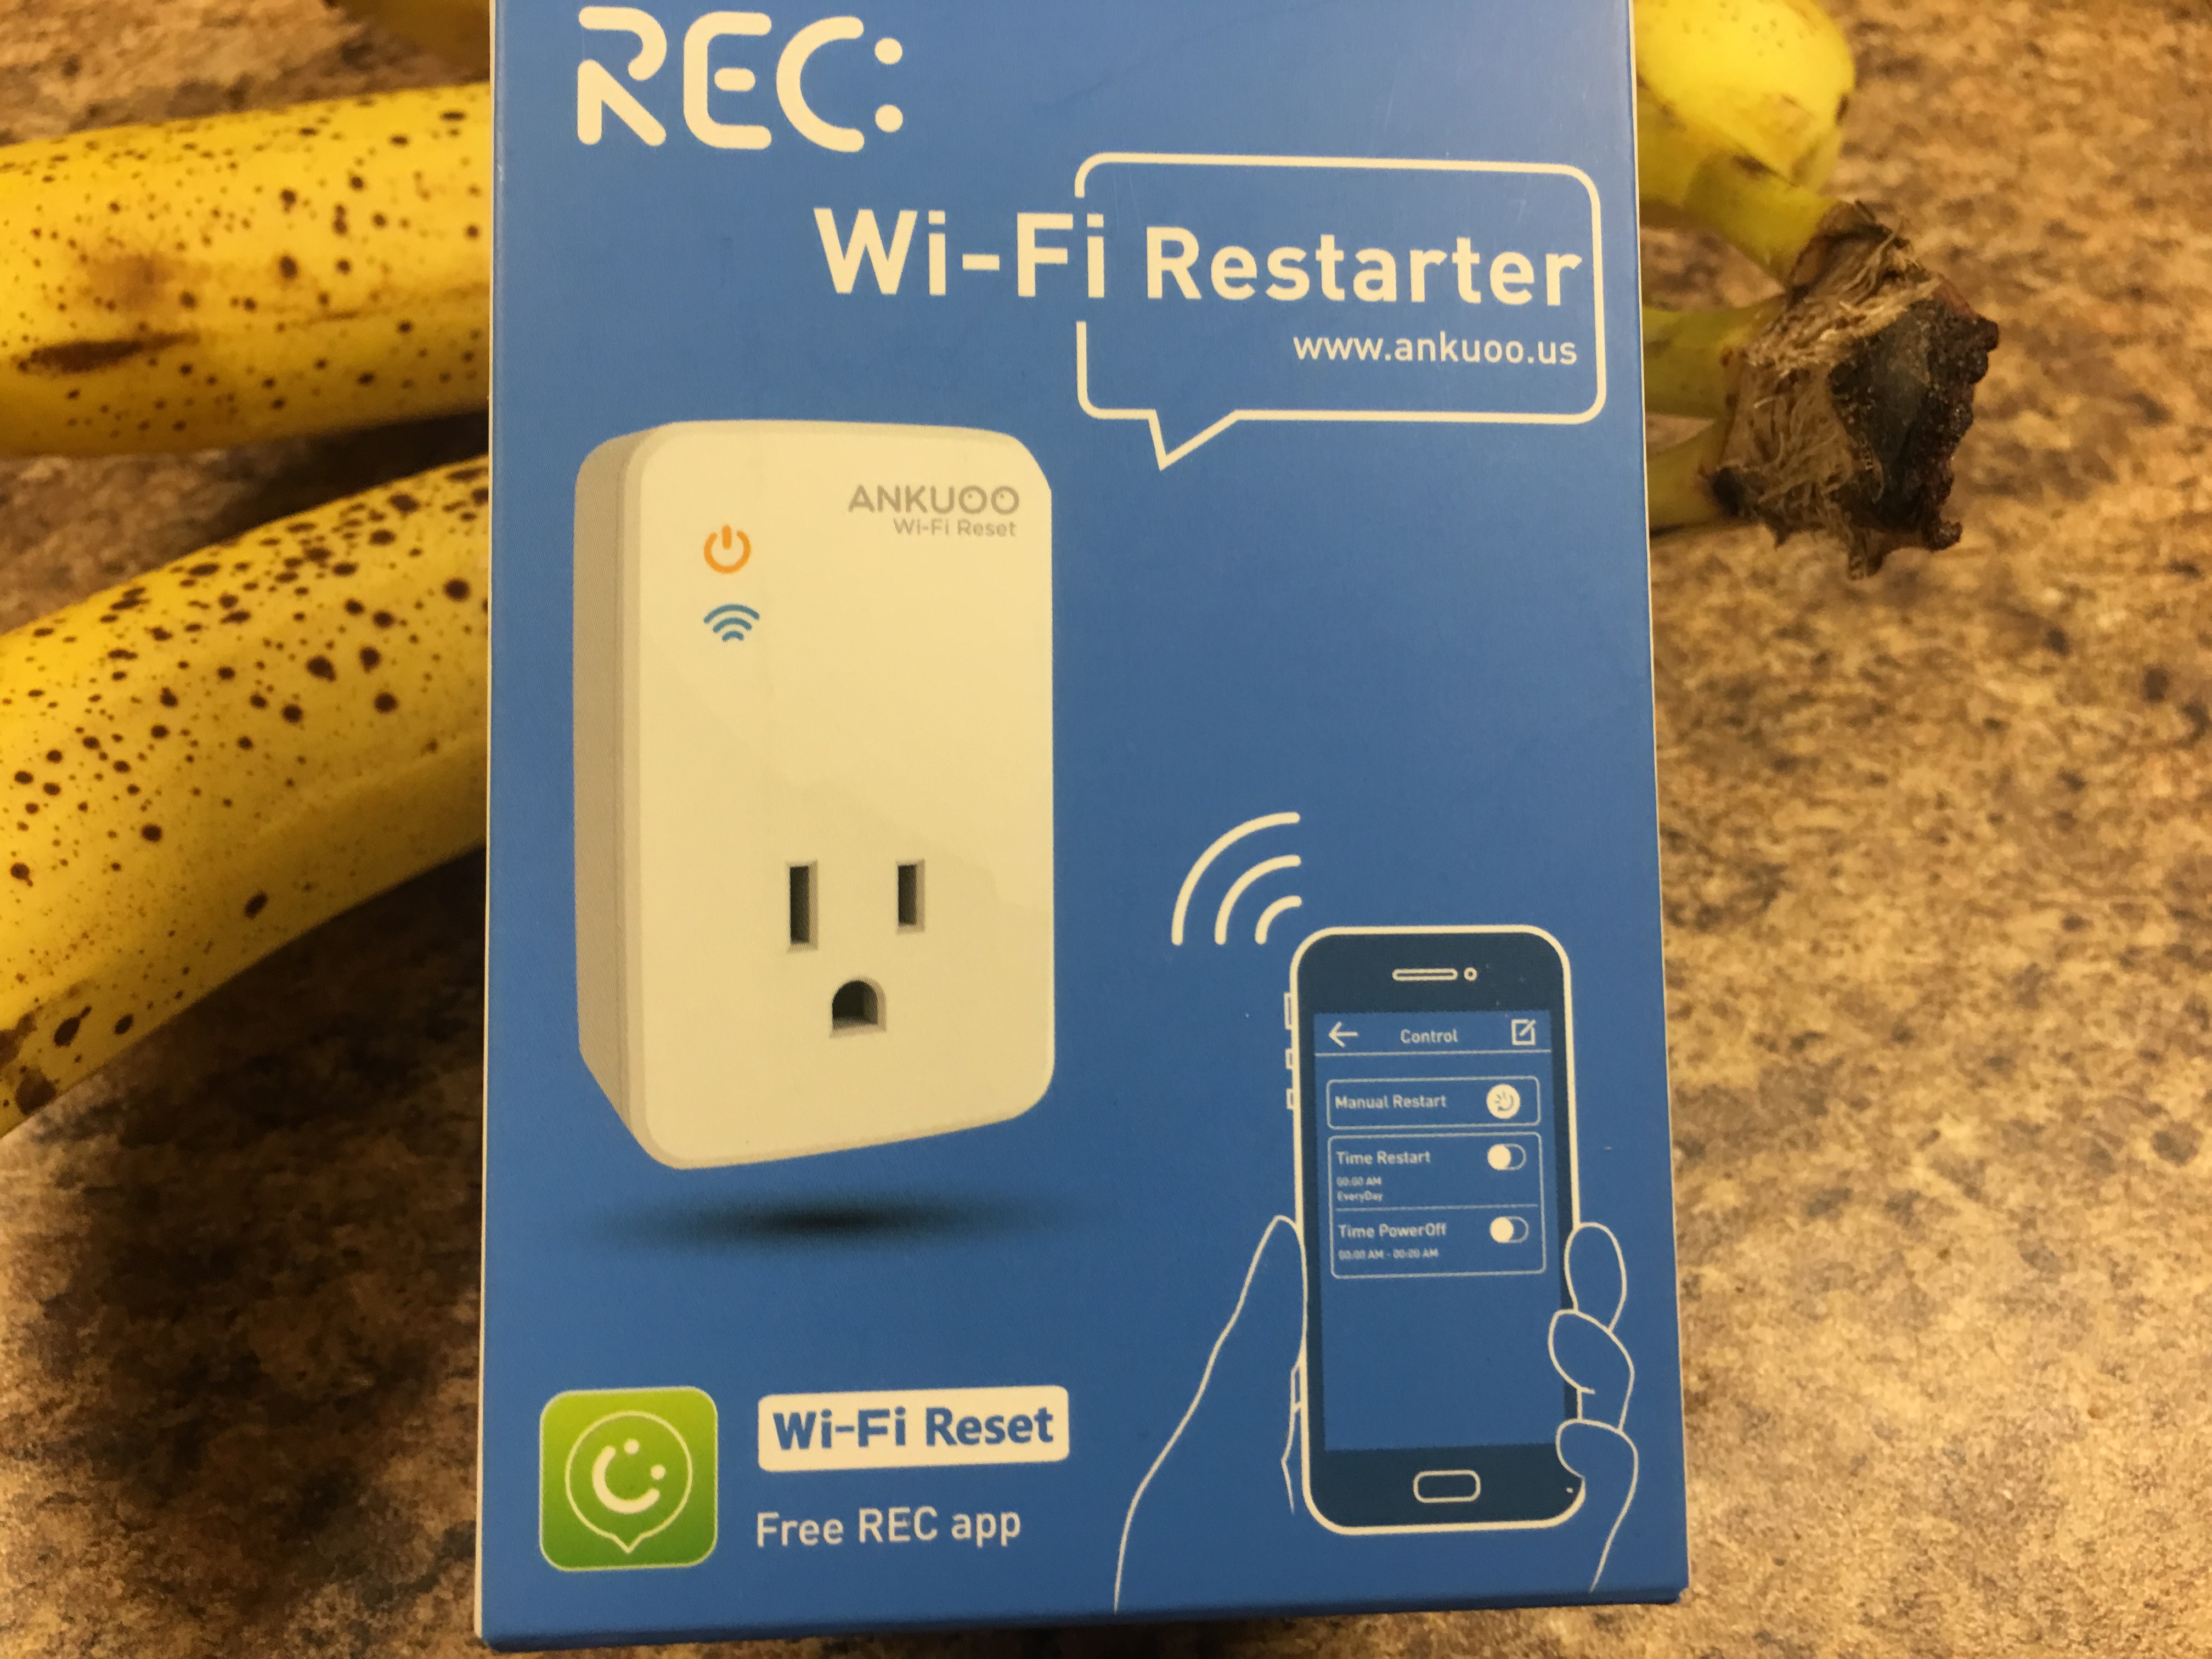 Automatically keeps your WIFI running at its best